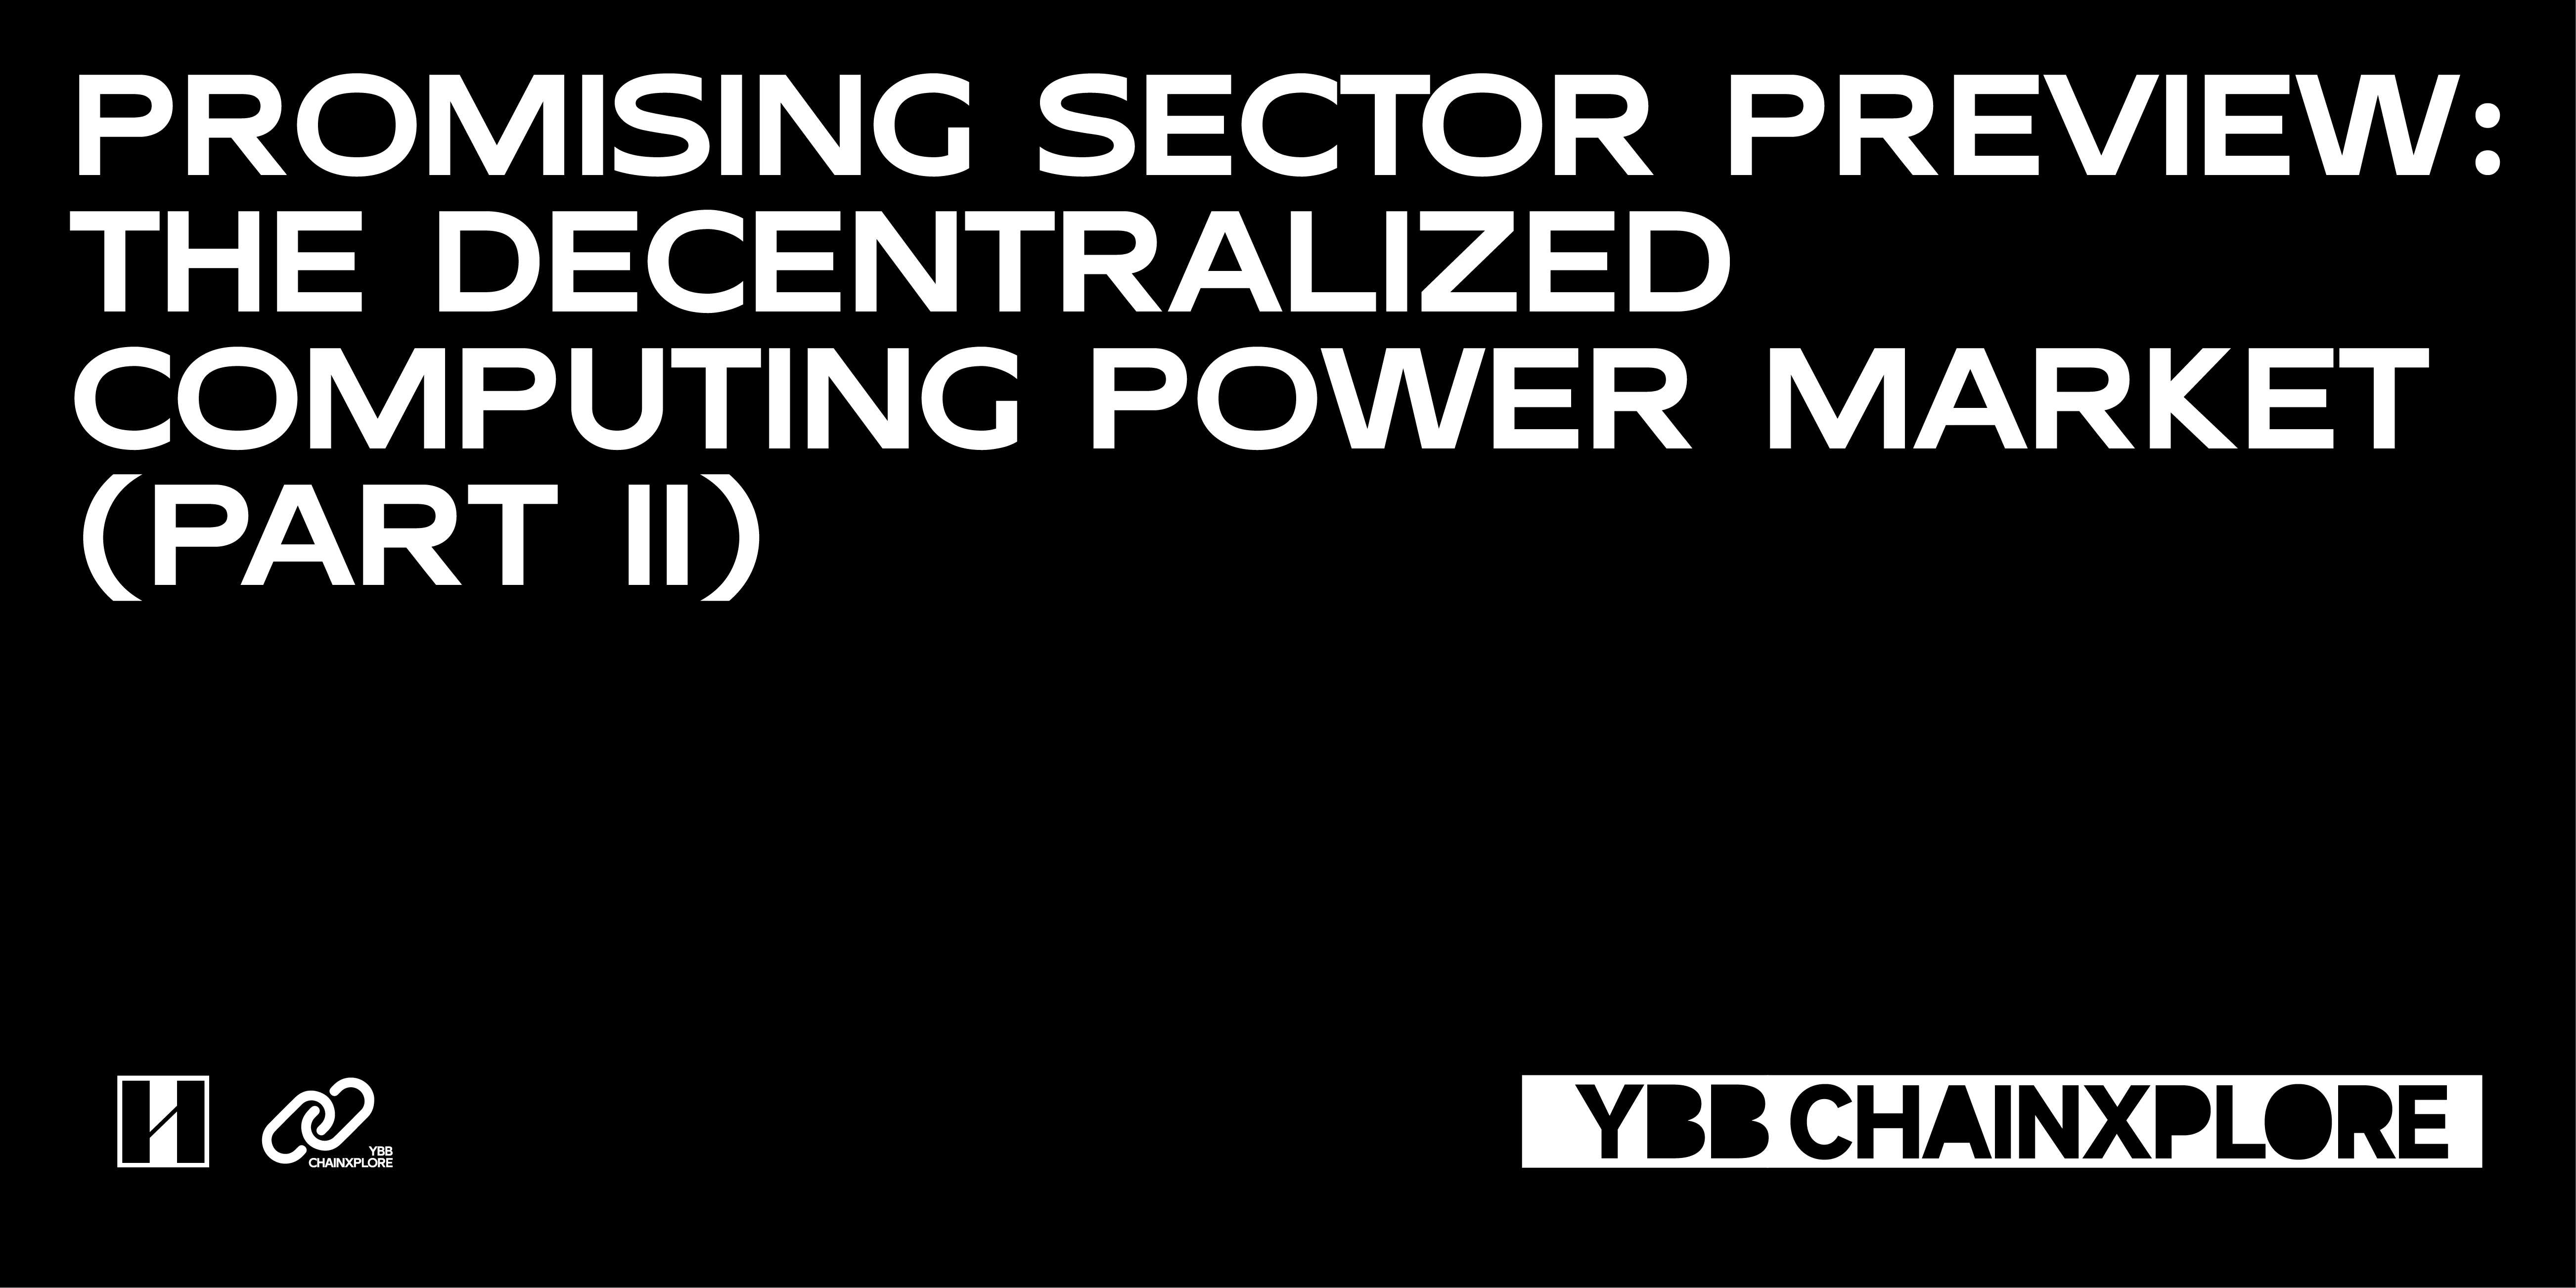 YBB Capital: Looking ahead to the potential track, decentralized computing power market (Part 2)